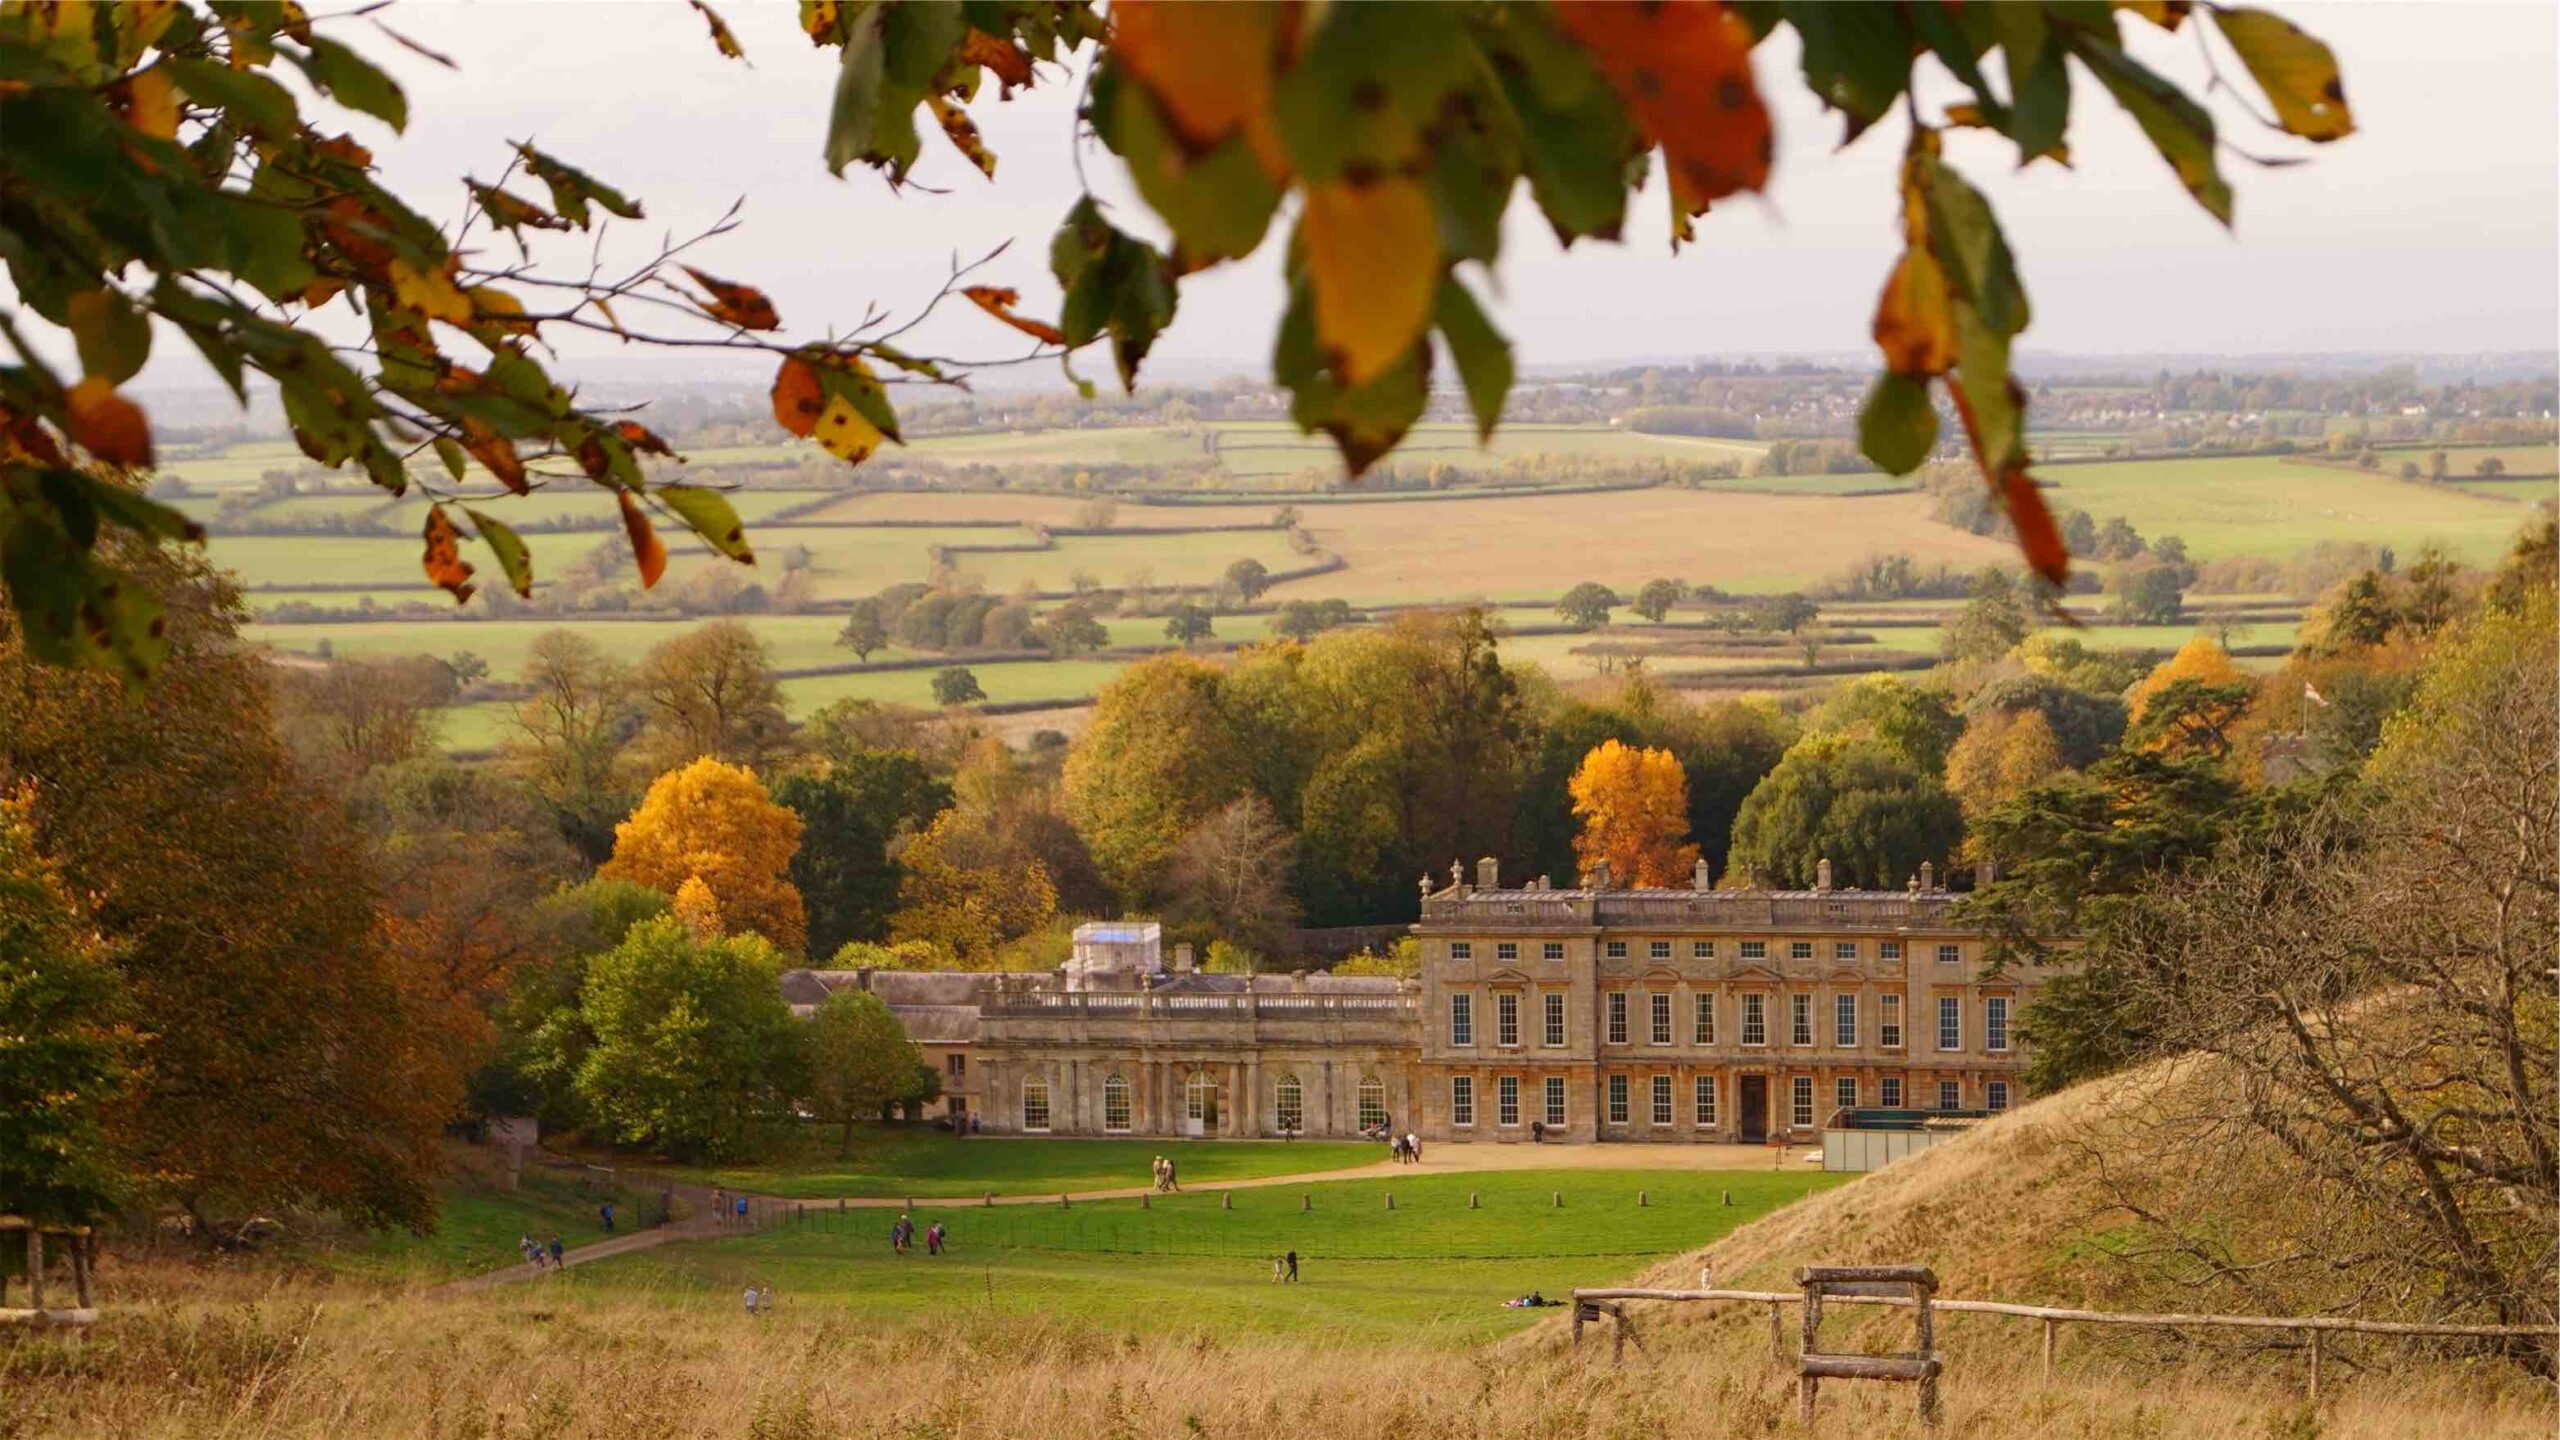 Grand estate house sits down a hill with golden trees and fields surrounding the grounds